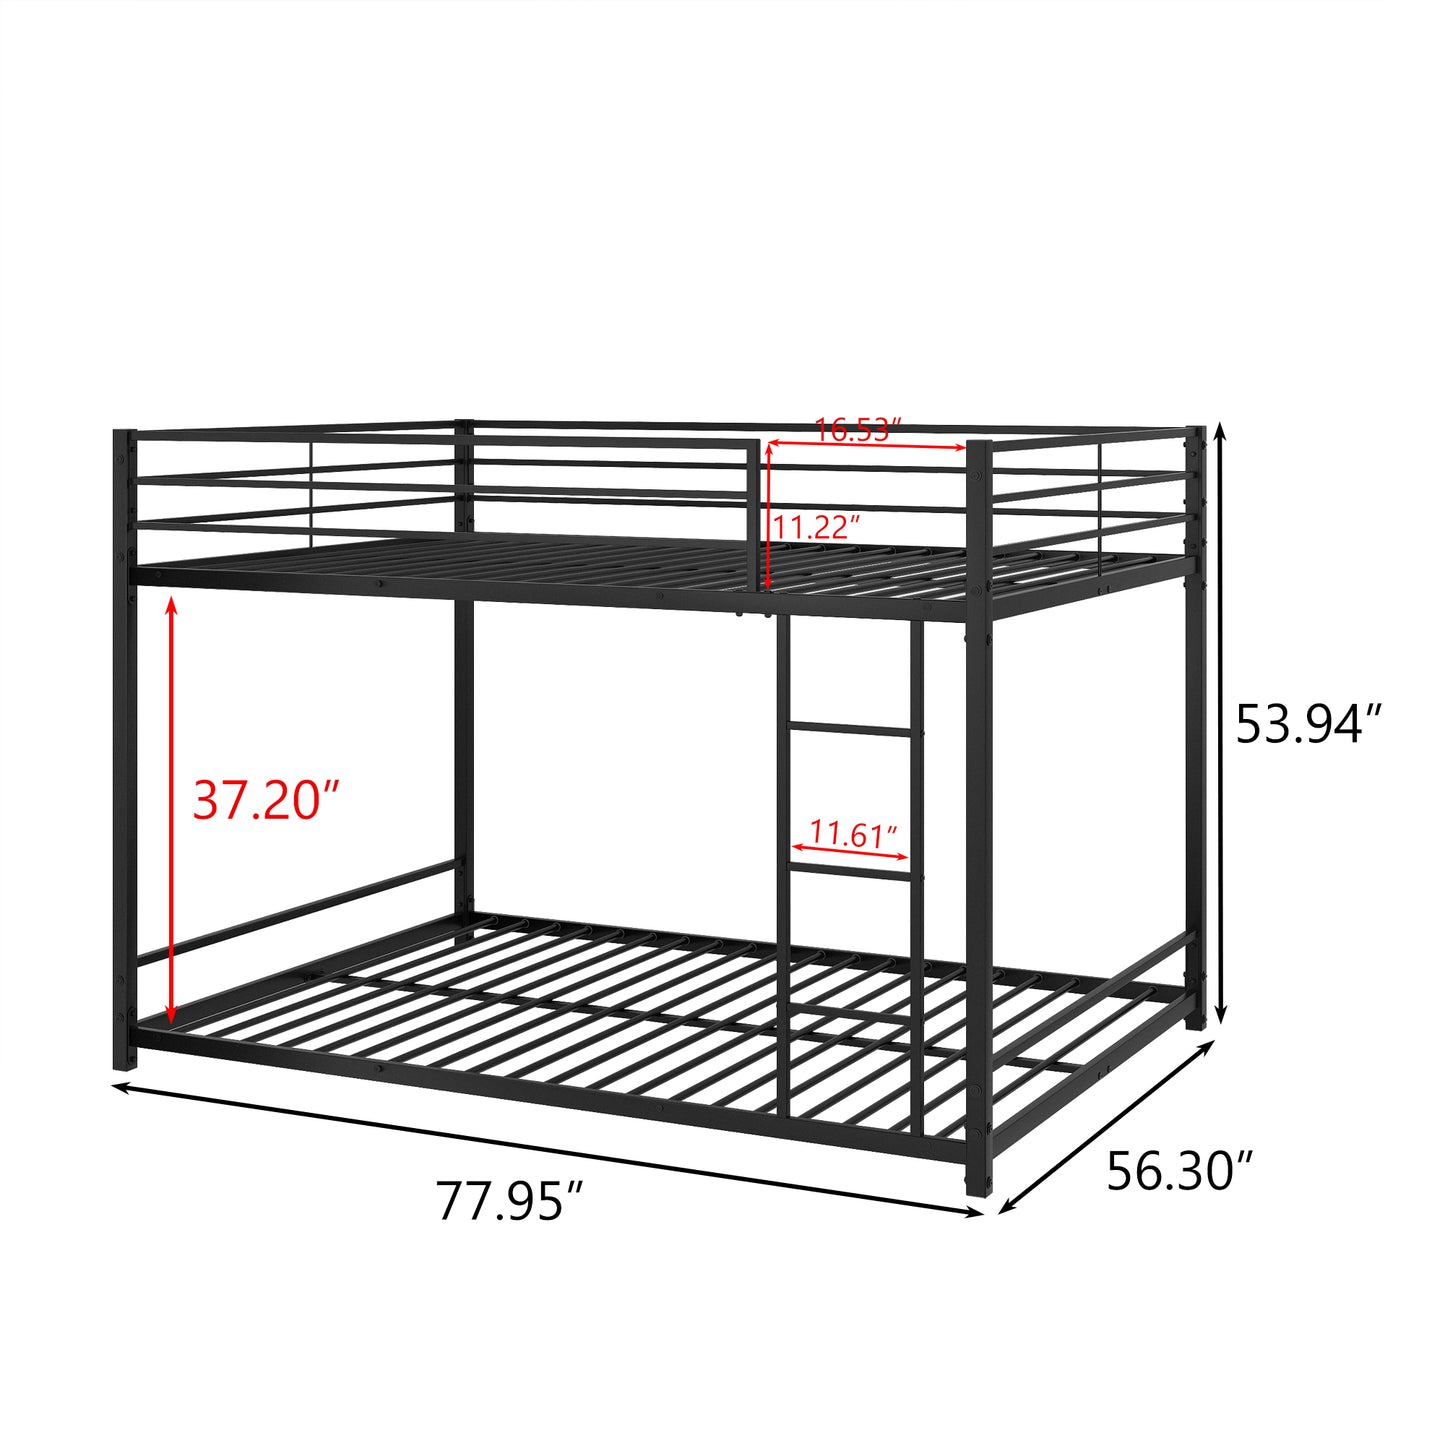 Bunk Bed Full over Full, SYNGAR Space Saver Bunk Bed with Heavy-Duty Metal Frame, Safety Guardrail & Ladder, Full Size Metal Bunk Bed Frame for Kids Boys Girls, No Box Spring Needed, Black, D1961